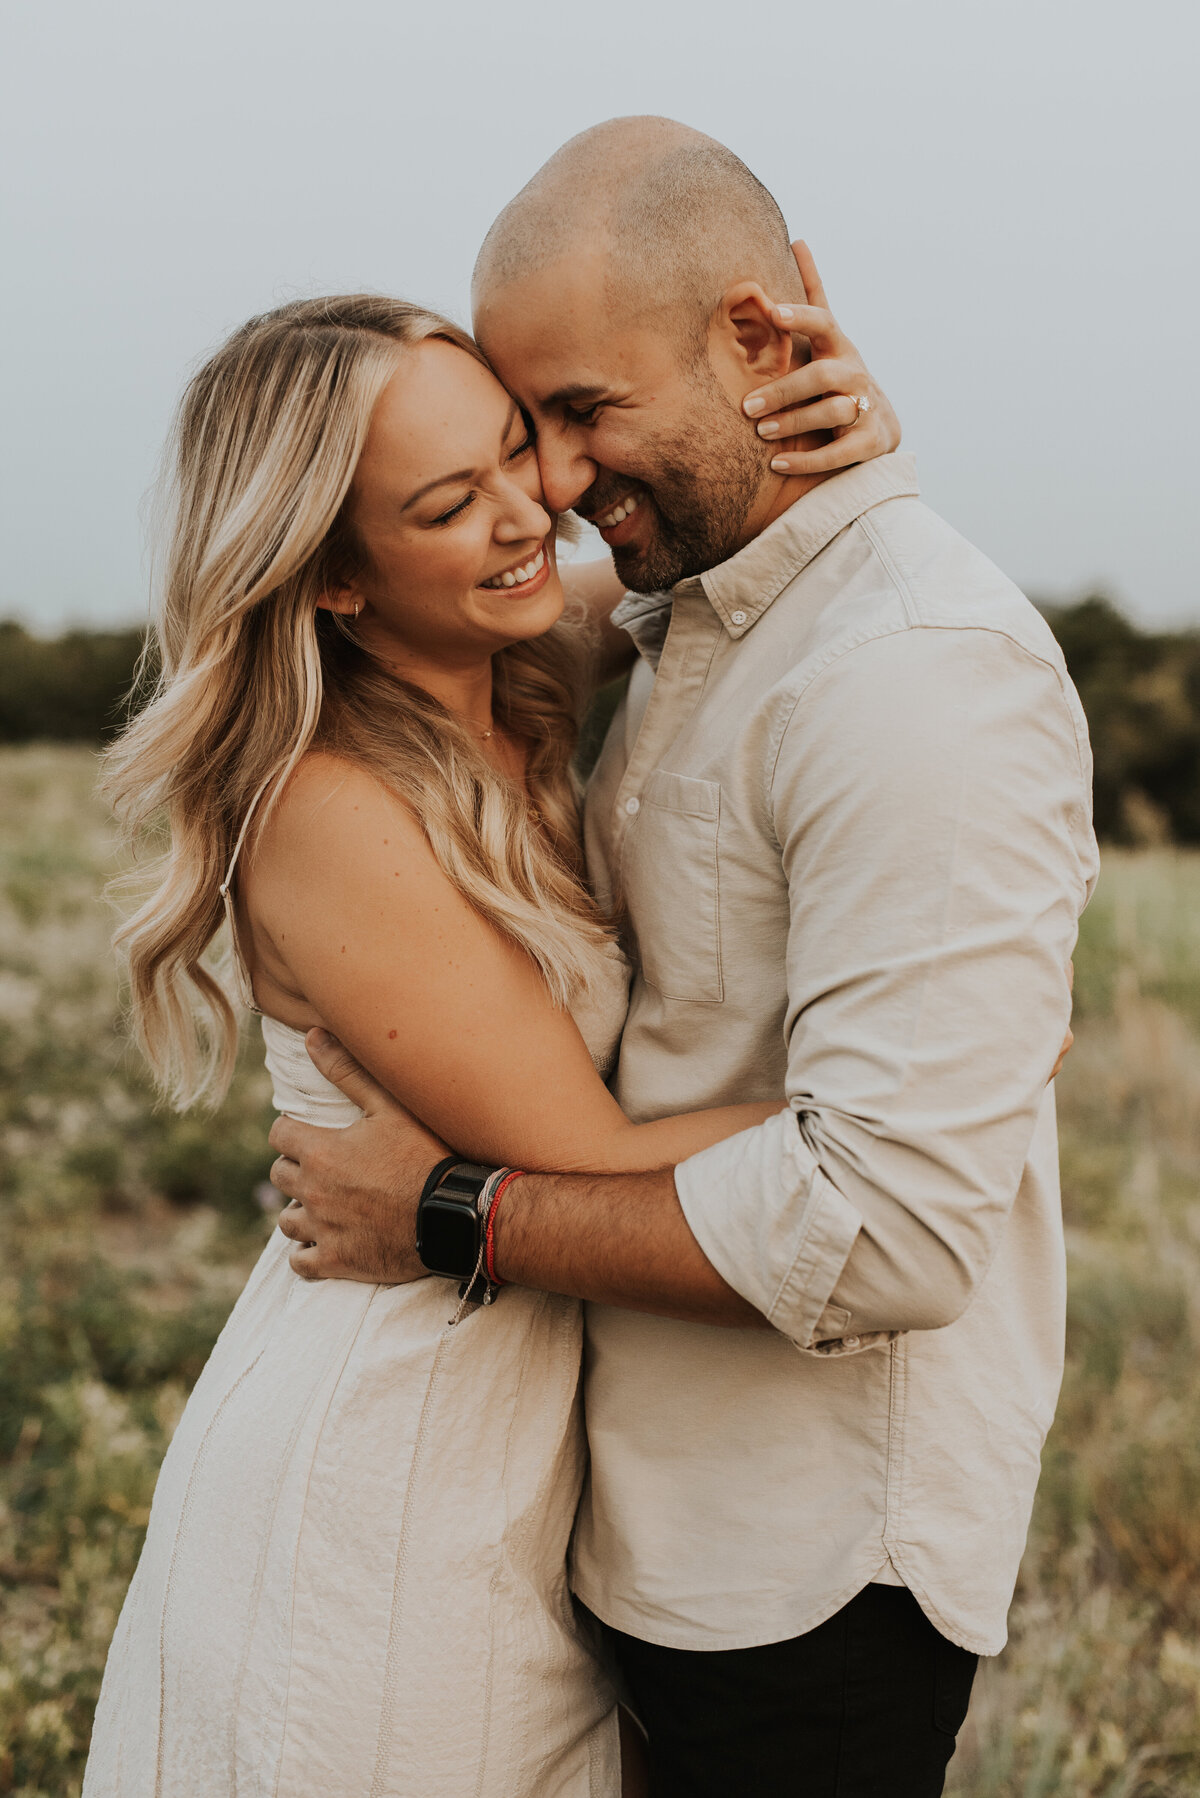 megan-and-andré-engagement-session-at-arbor-hills-nature-preserve-texas-by-bruna-kitchen-photography-12